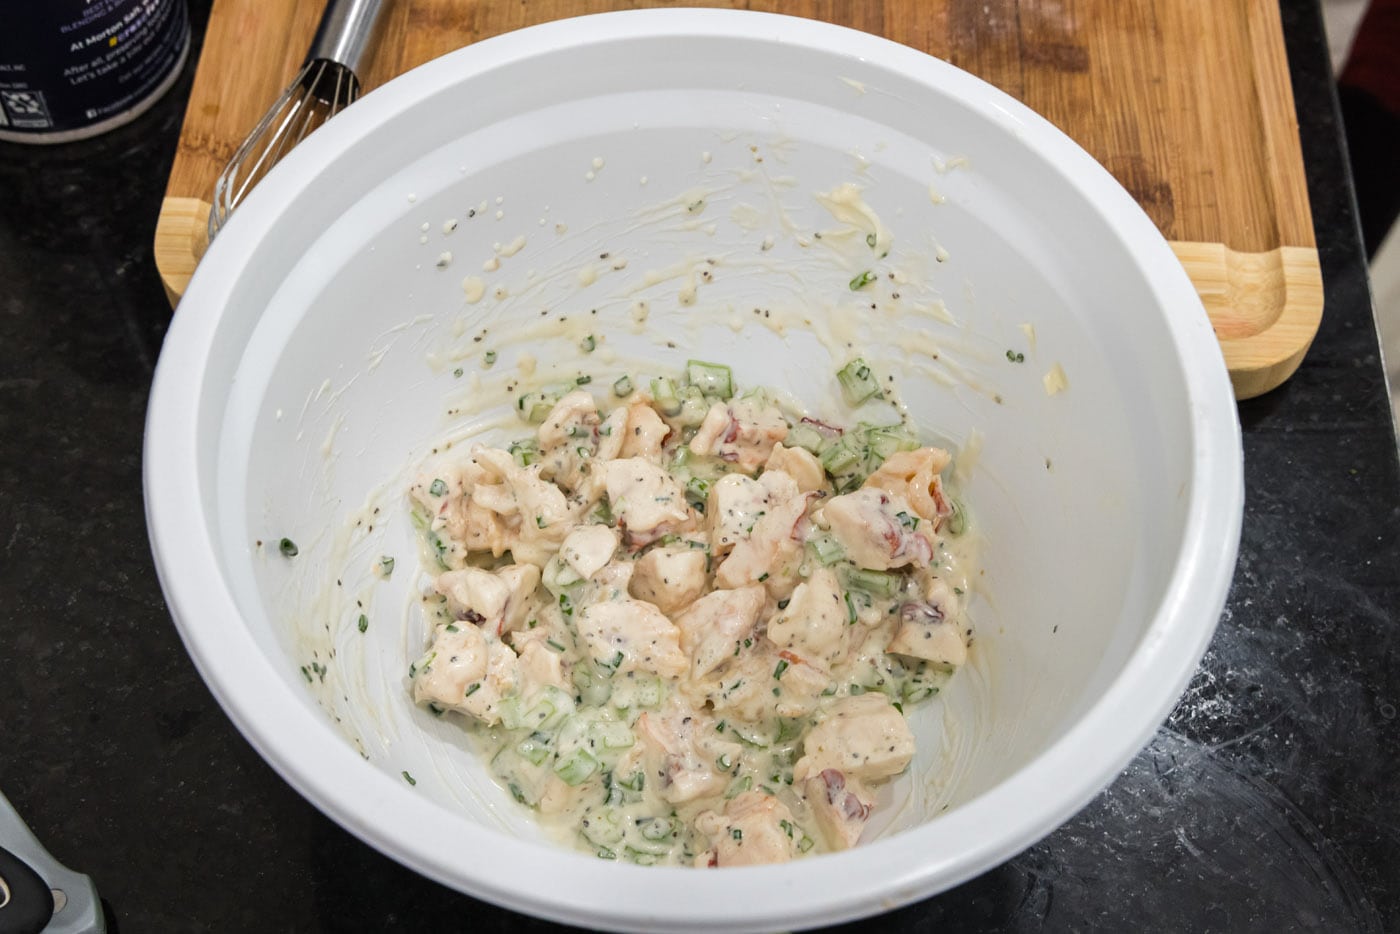 lobster salad ingredients in a mixing bowl